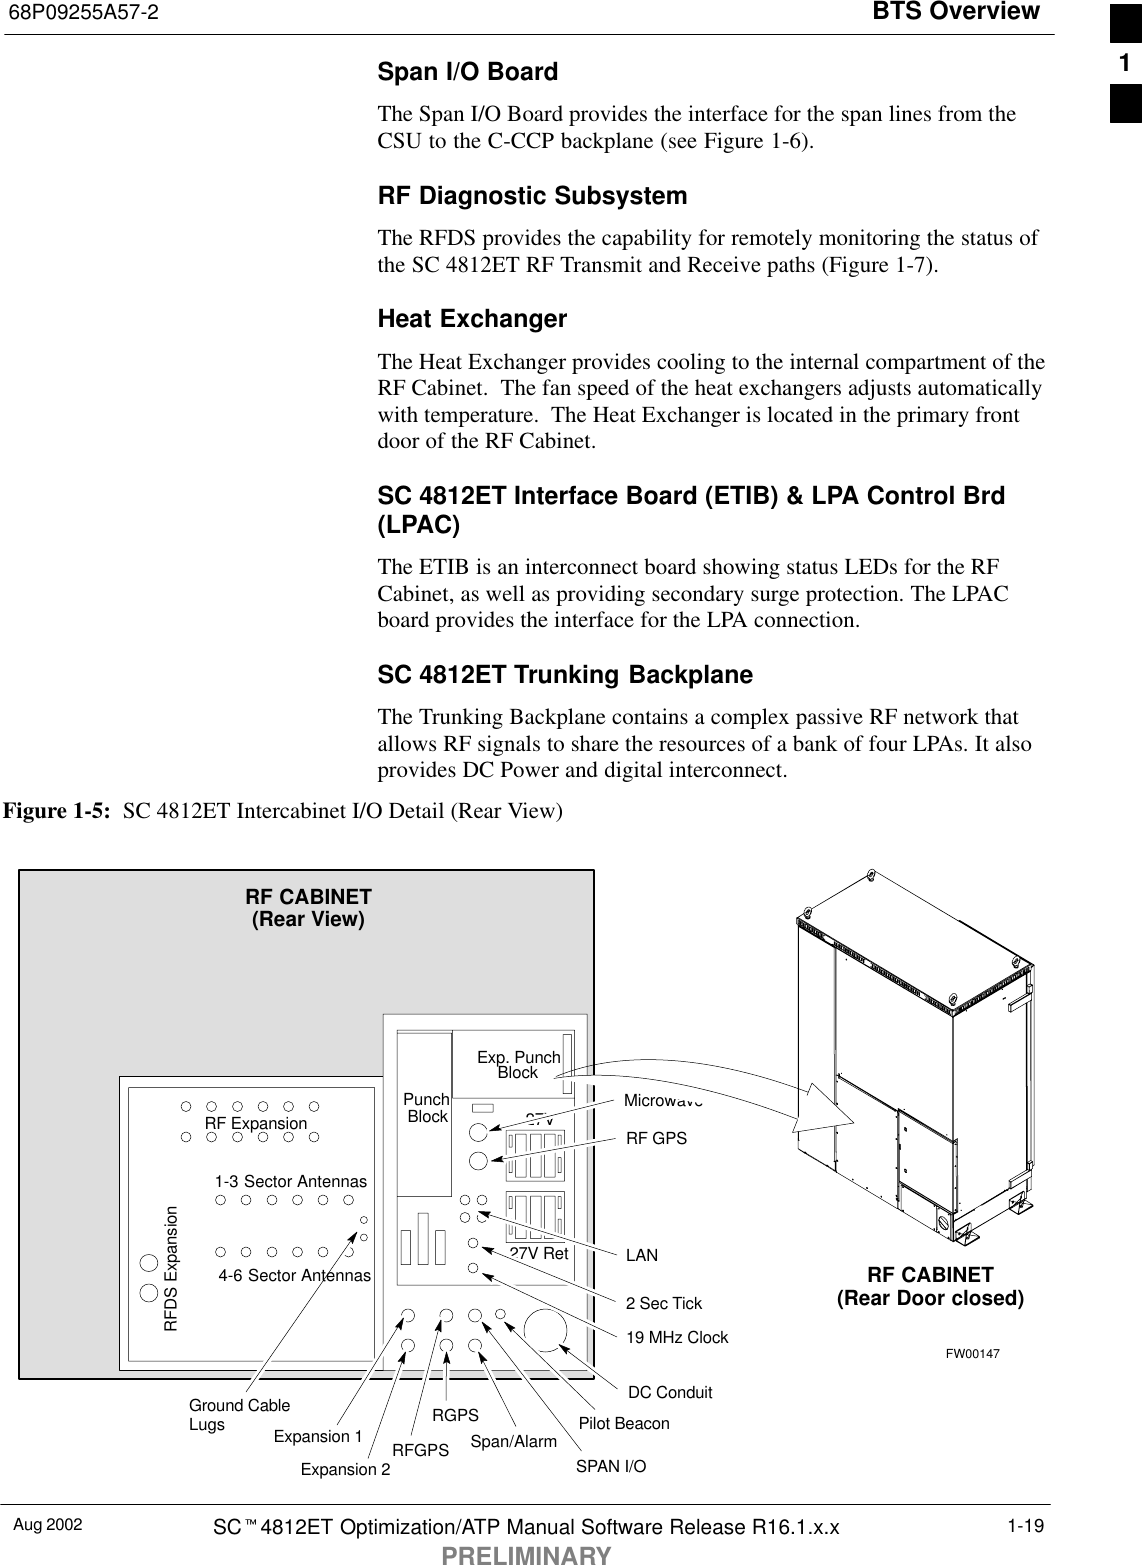 BTS Overview68P09255A57-2Aug 2002 SCt4812ET Optimization/ATP Manual Software Release R16.1.x.xPRELIMINARY1-19Span I/O BoardThe Span I/O Board provides the interface for the span lines from theCSU to the C-CCP backplane (see Figure 1-6).RF Diagnostic SubsystemThe RFDS provides the capability for remotely monitoring the status ofthe SC 4812ET RF Transmit and Receive paths (Figure 1-7).Heat ExchangerThe Heat Exchanger provides cooling to the internal compartment of theRF Cabinet.  The fan speed of the heat exchangers adjusts automaticallywith temperature.  The Heat Exchanger is located in the primary frontdoor of the RF Cabinet.SC 4812ET Interface Board (ETIB) &amp; LPA Control Brd(LPAC)The ETIB is an interconnect board showing status LEDs for the RFCabinet, as well as providing secondary surge protection. The LPACboard provides the interface for the LPA connection.SC 4812ET Trunking BackplaneThe Trunking Backplane contains a complex passive RF network thatallows RF signals to share the resources of a bank of four LPAs. It alsoprovides DC Power and digital interconnect.Figure 1-5:  SC 4812ET Intercabinet I/O Detail (Rear View)SPAN I/ORFGPSRF CABINET(Rear View)RFDS ExpansionRF ExpansionExp. PunchPunchBlockBlock27V27V RetDC ConduitPilot BeaconMicrowaveRF GPSLAN2 Sec Tick19 MHz ClockGround CableLugs1-3 Sector Antennas4-6 Sector AntennasSpan/AlarmExpansion 1Expansion 2RF CABINET(Rear Door closed)RGPSFW001471